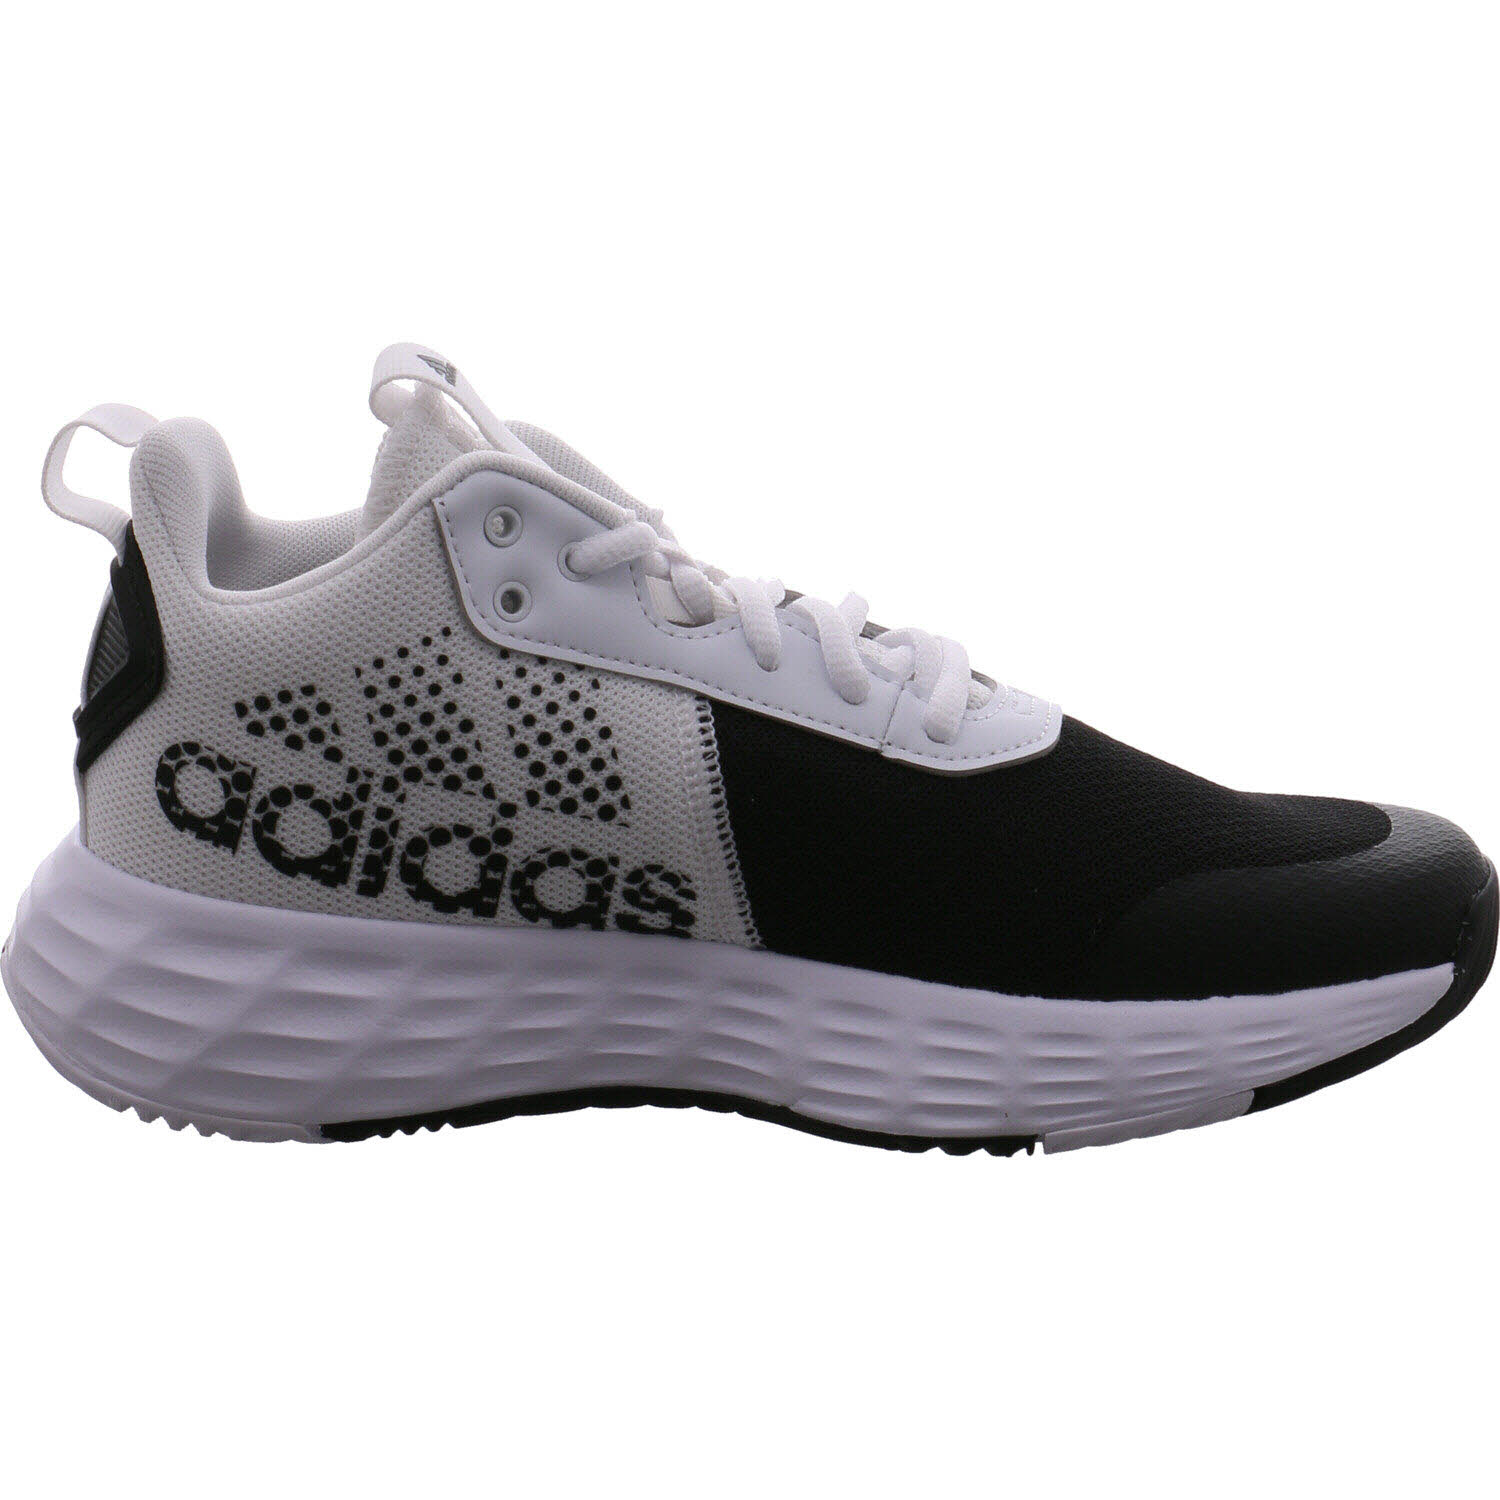 Adidas Sneaker low Ownthegame 2.0 K